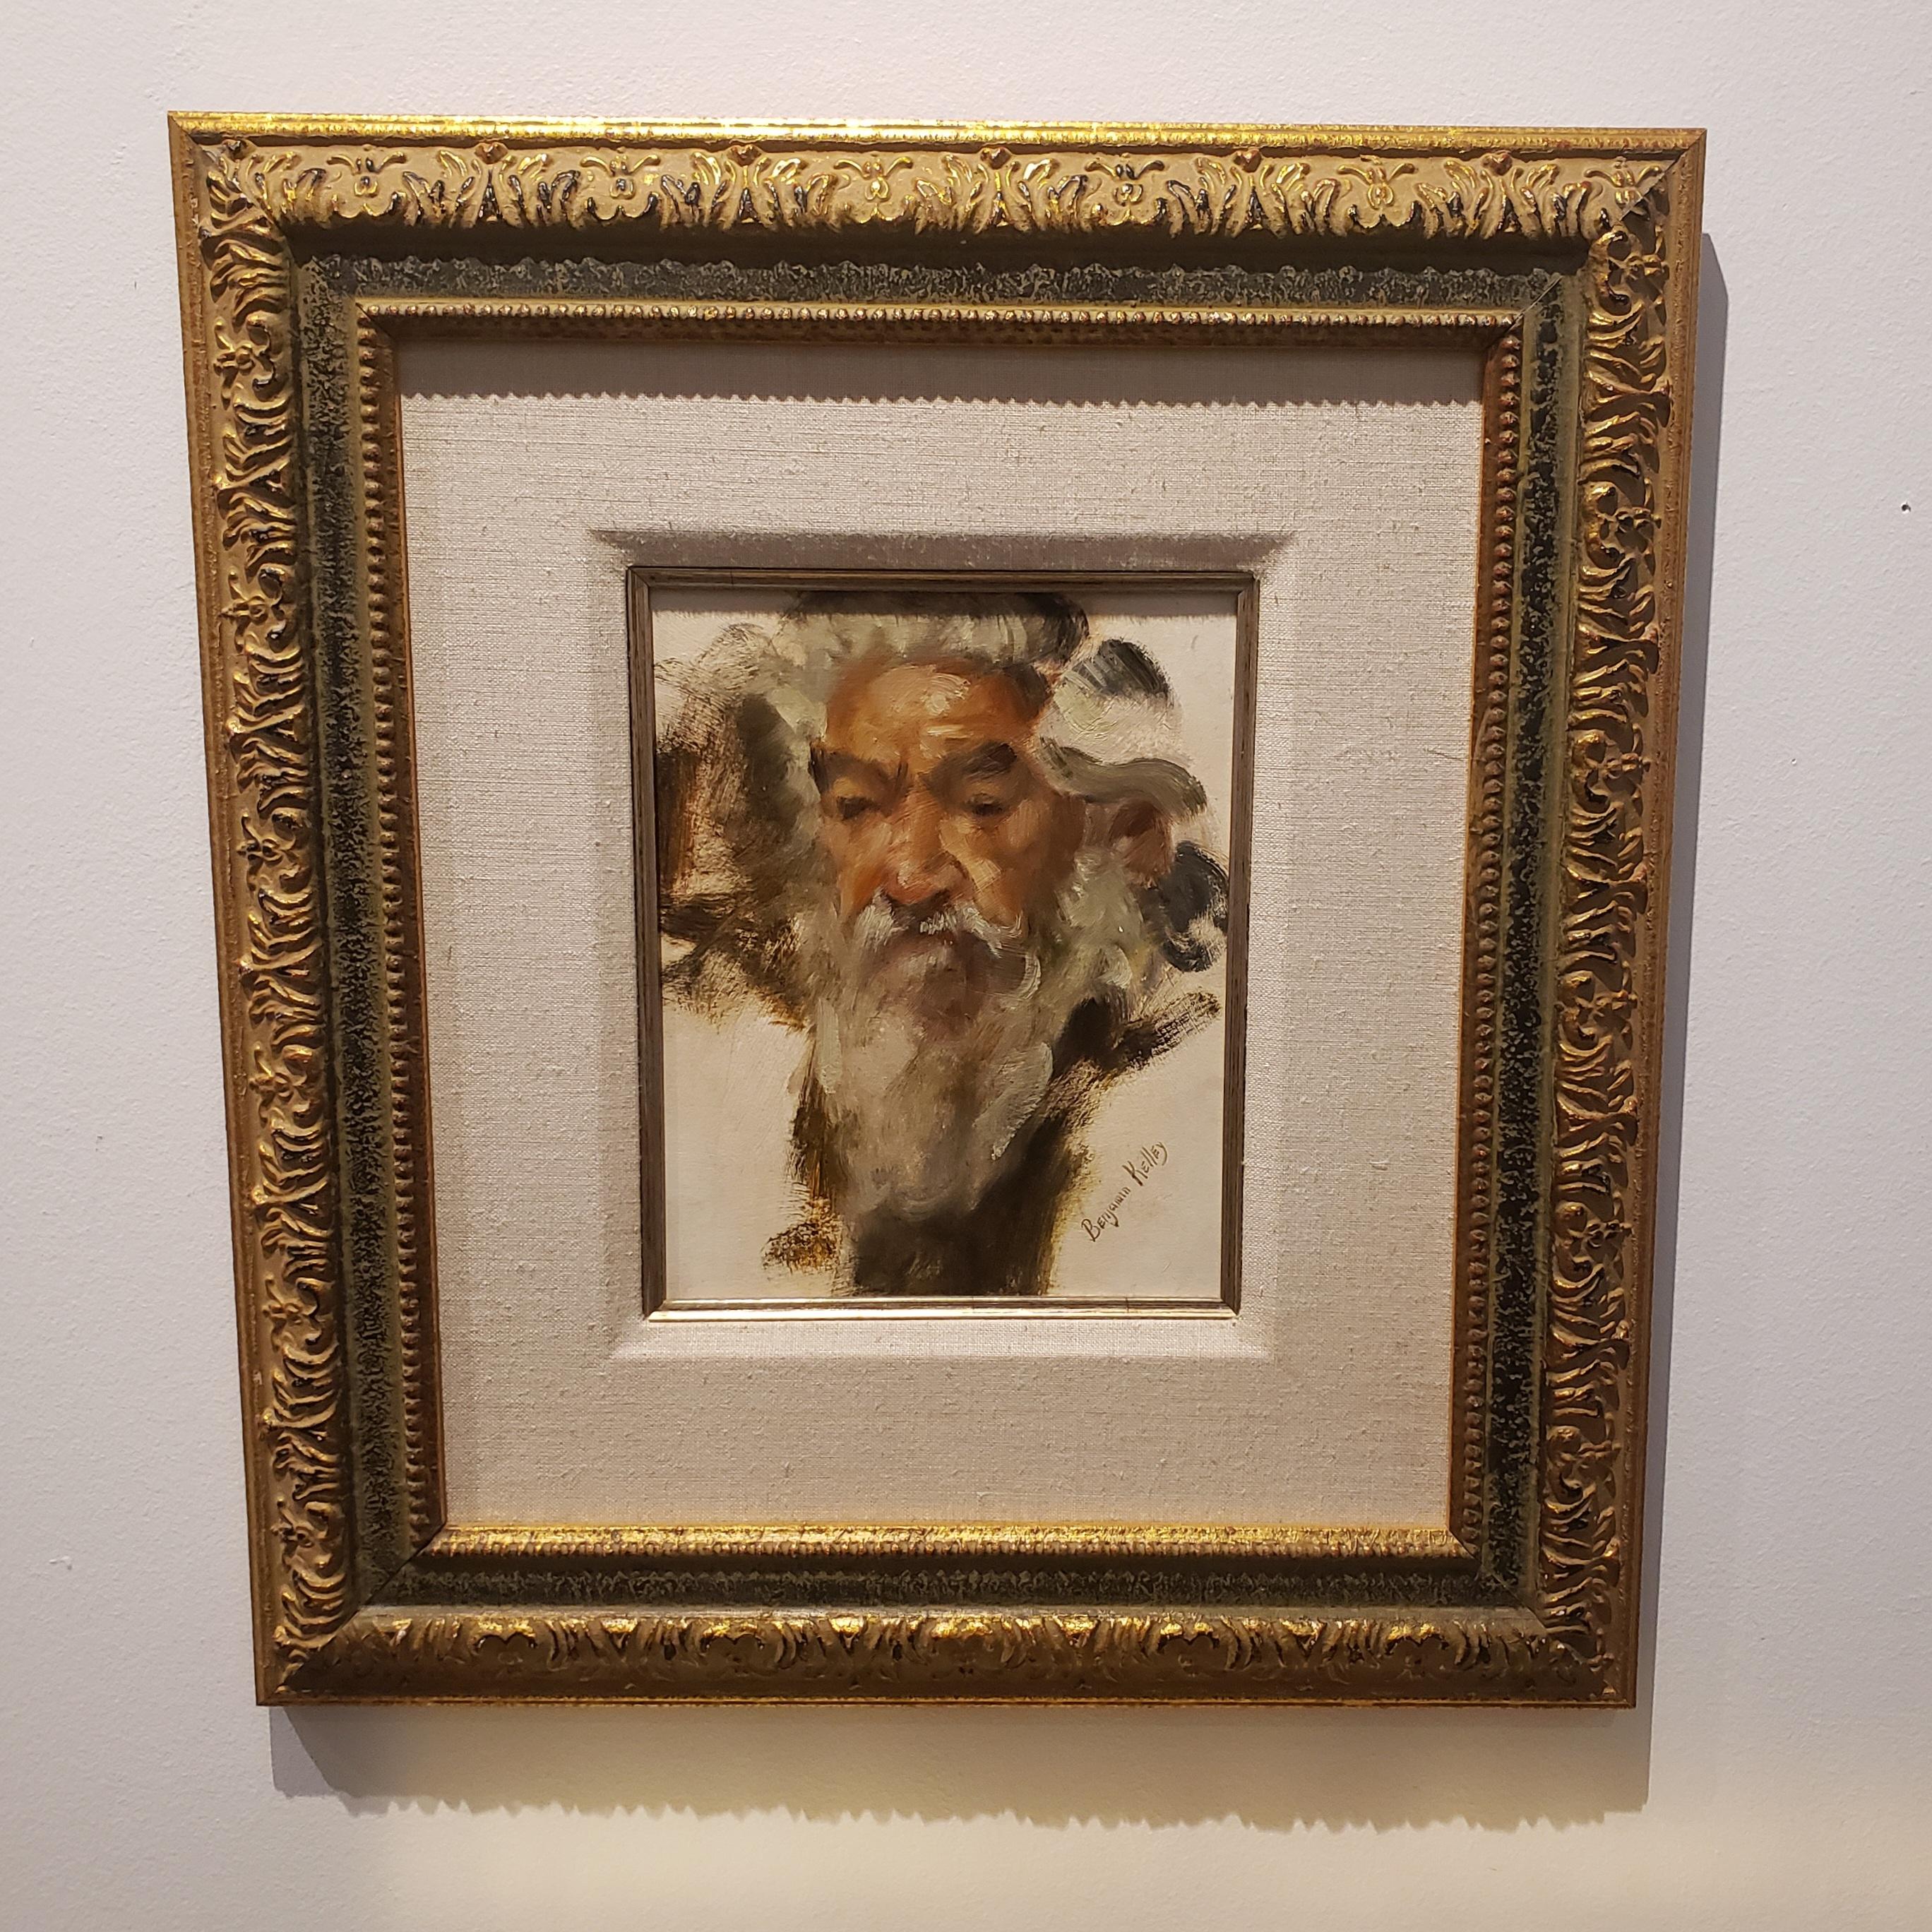 The Wise Man by Benjamin Kelley is oil on canvas with an archival frame 10 x 8, 21 x 19 framed. The Wise Man was a subject that Benjamin and his father Ramon Kelley painted over the years.

Benjamin Kelley is the son of painter Ramon Kelley.